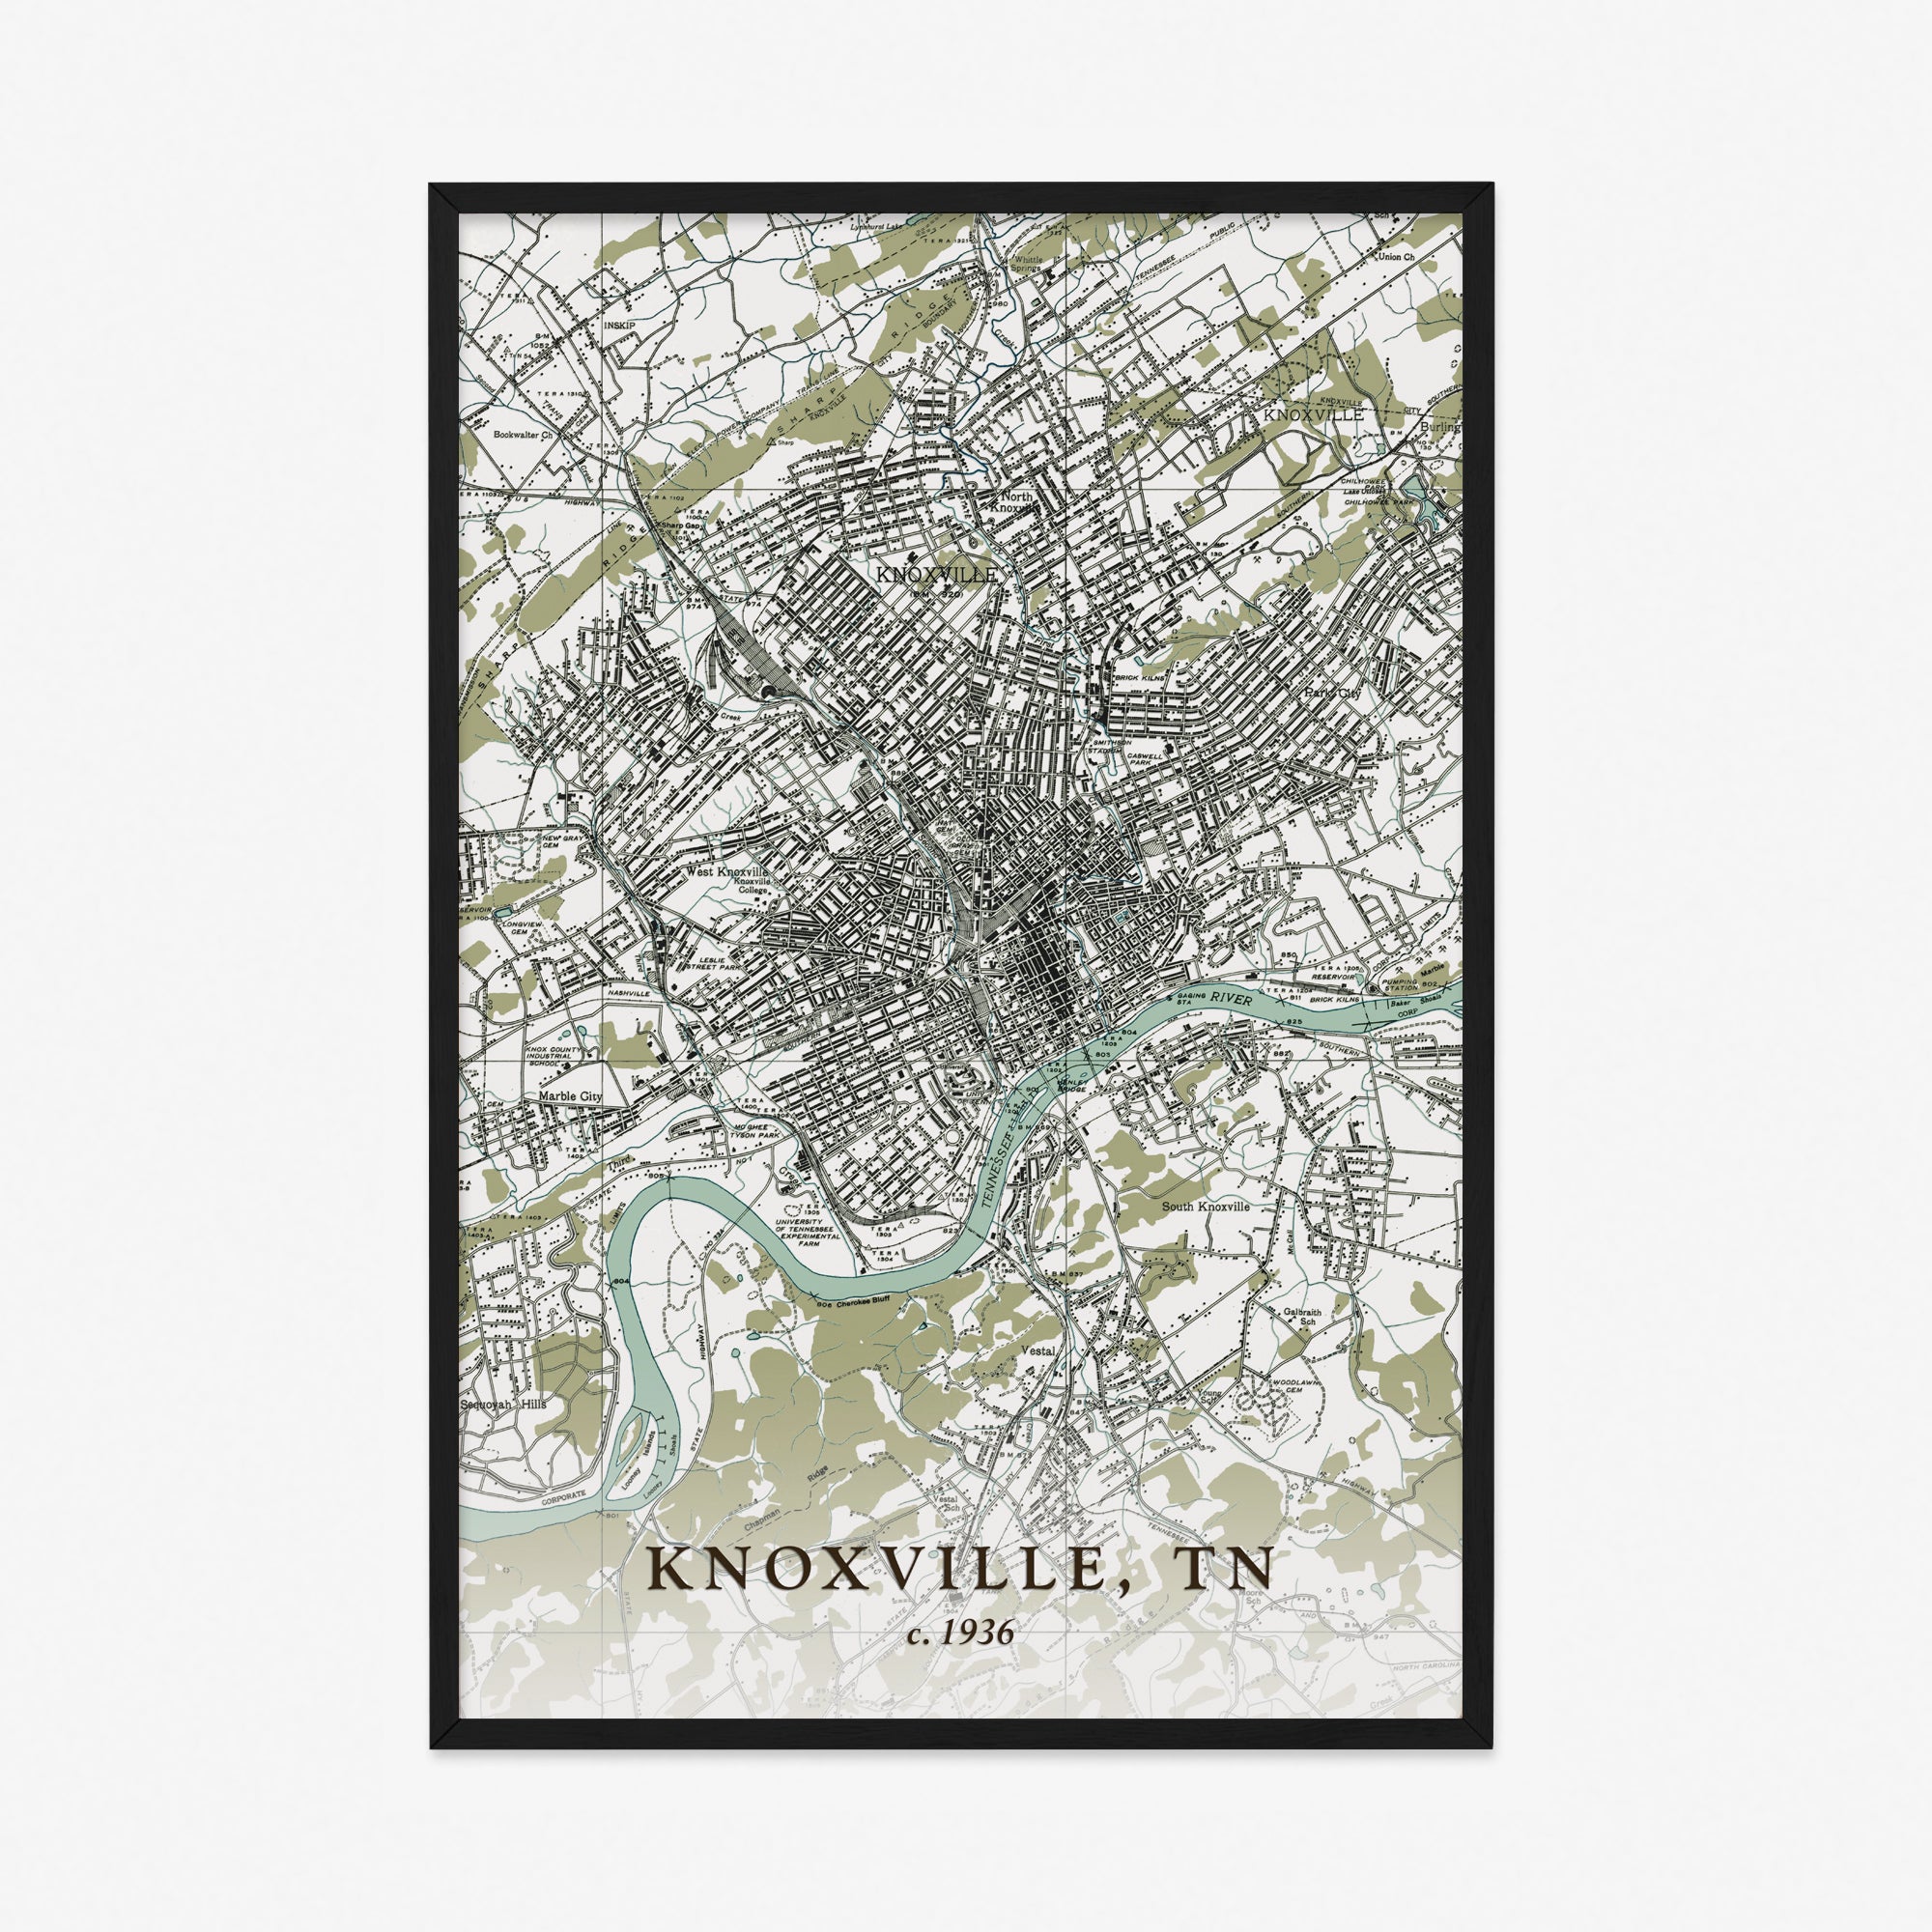 Knoxville, TN - 1936 Physical Map